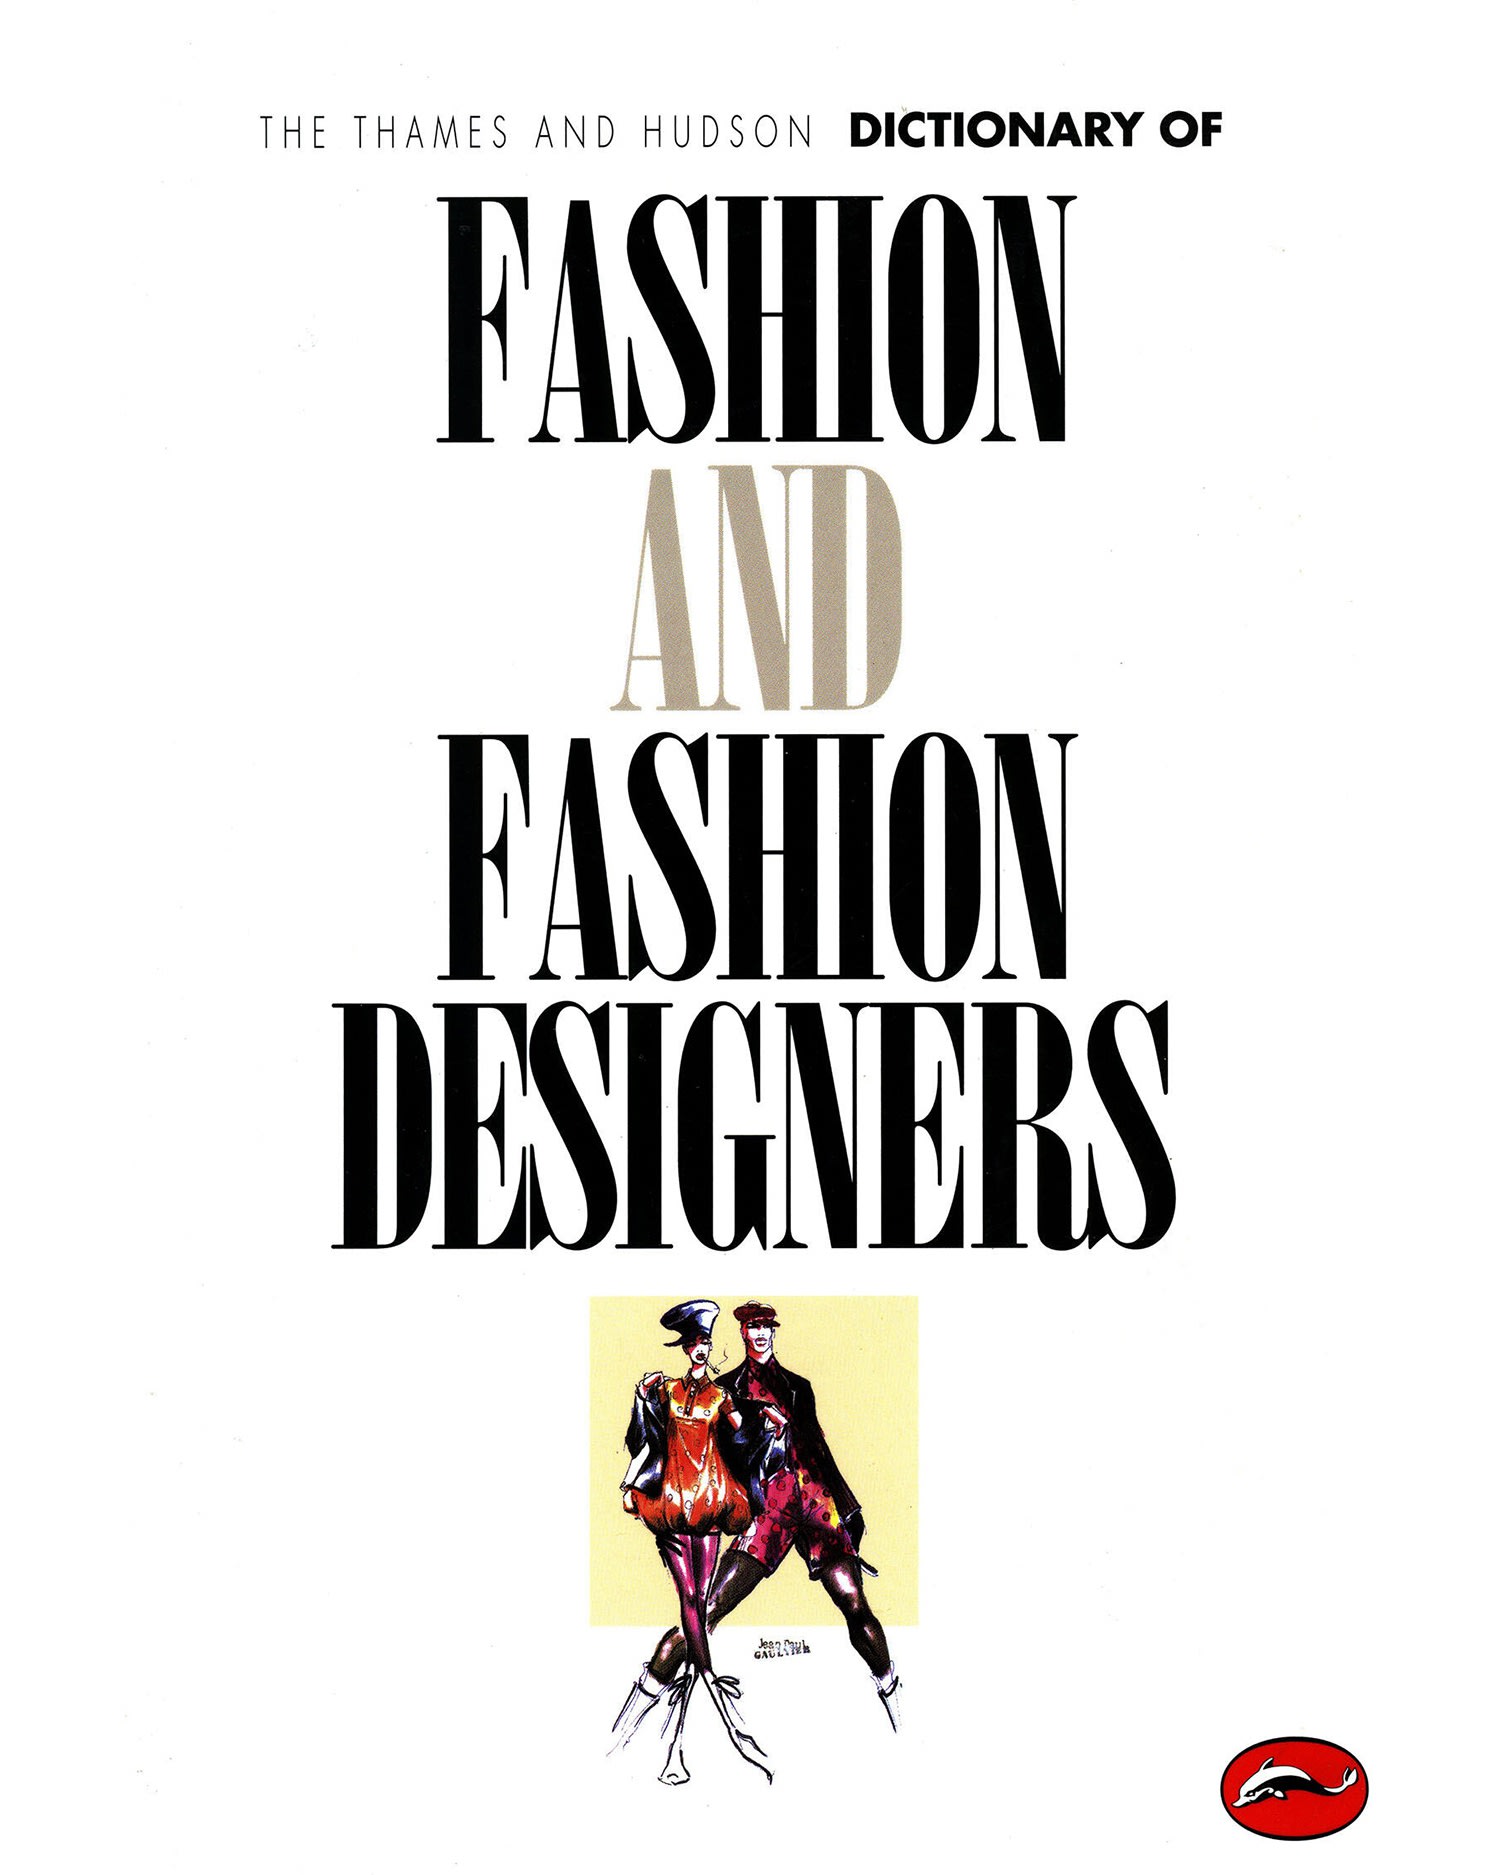 The front cover of the book The Dictionary of Fashion Designers. The page has the title in large type along with a small fashion design inspired person and clothing sketch at the bottom. 